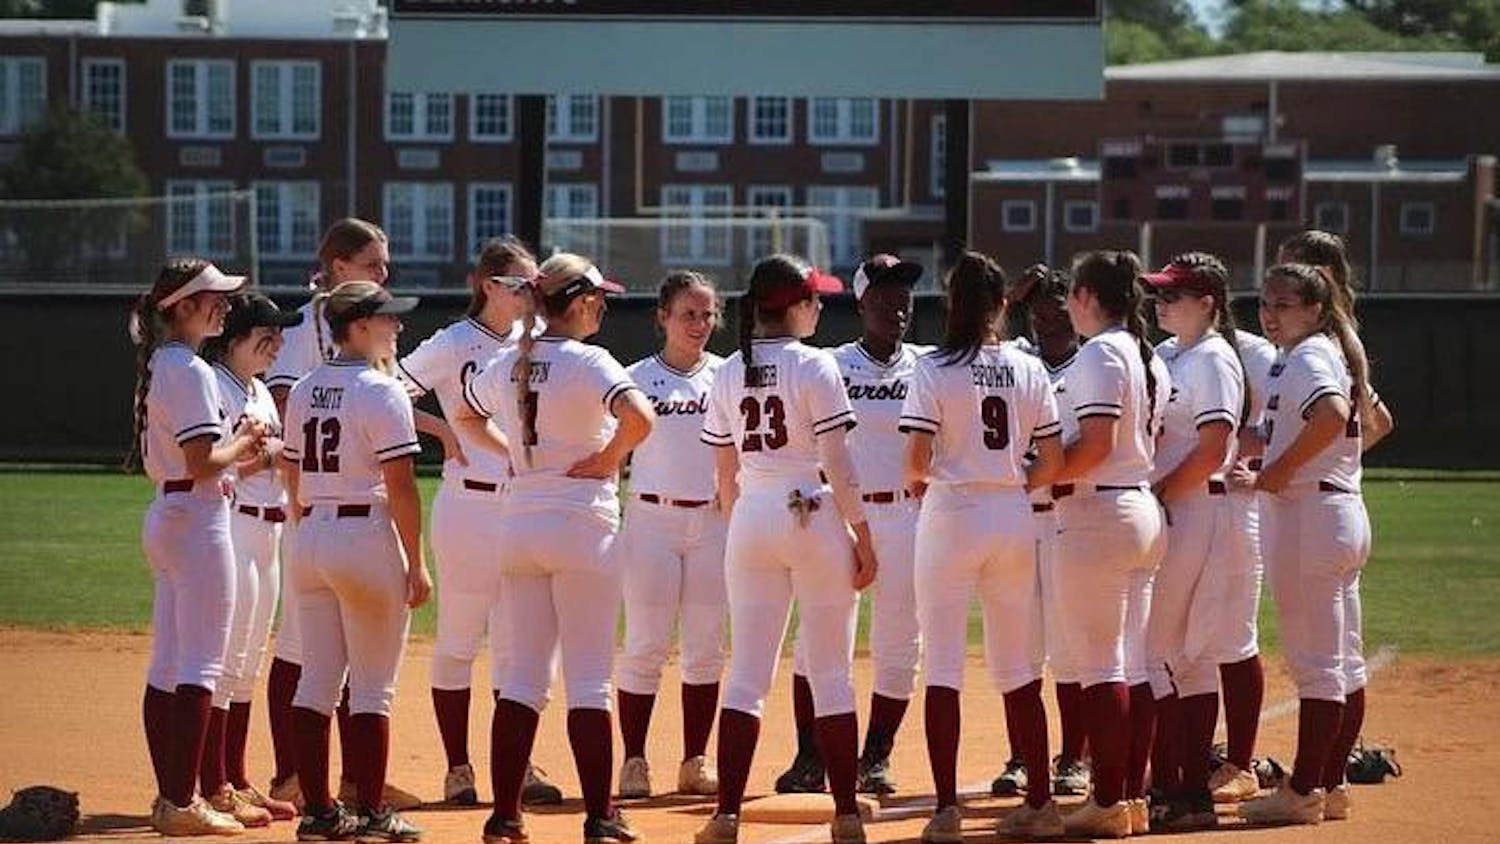 The Carolina Club Softball team gathers in the middle of a field. The team was founded at the University of South Carolina in 2021.